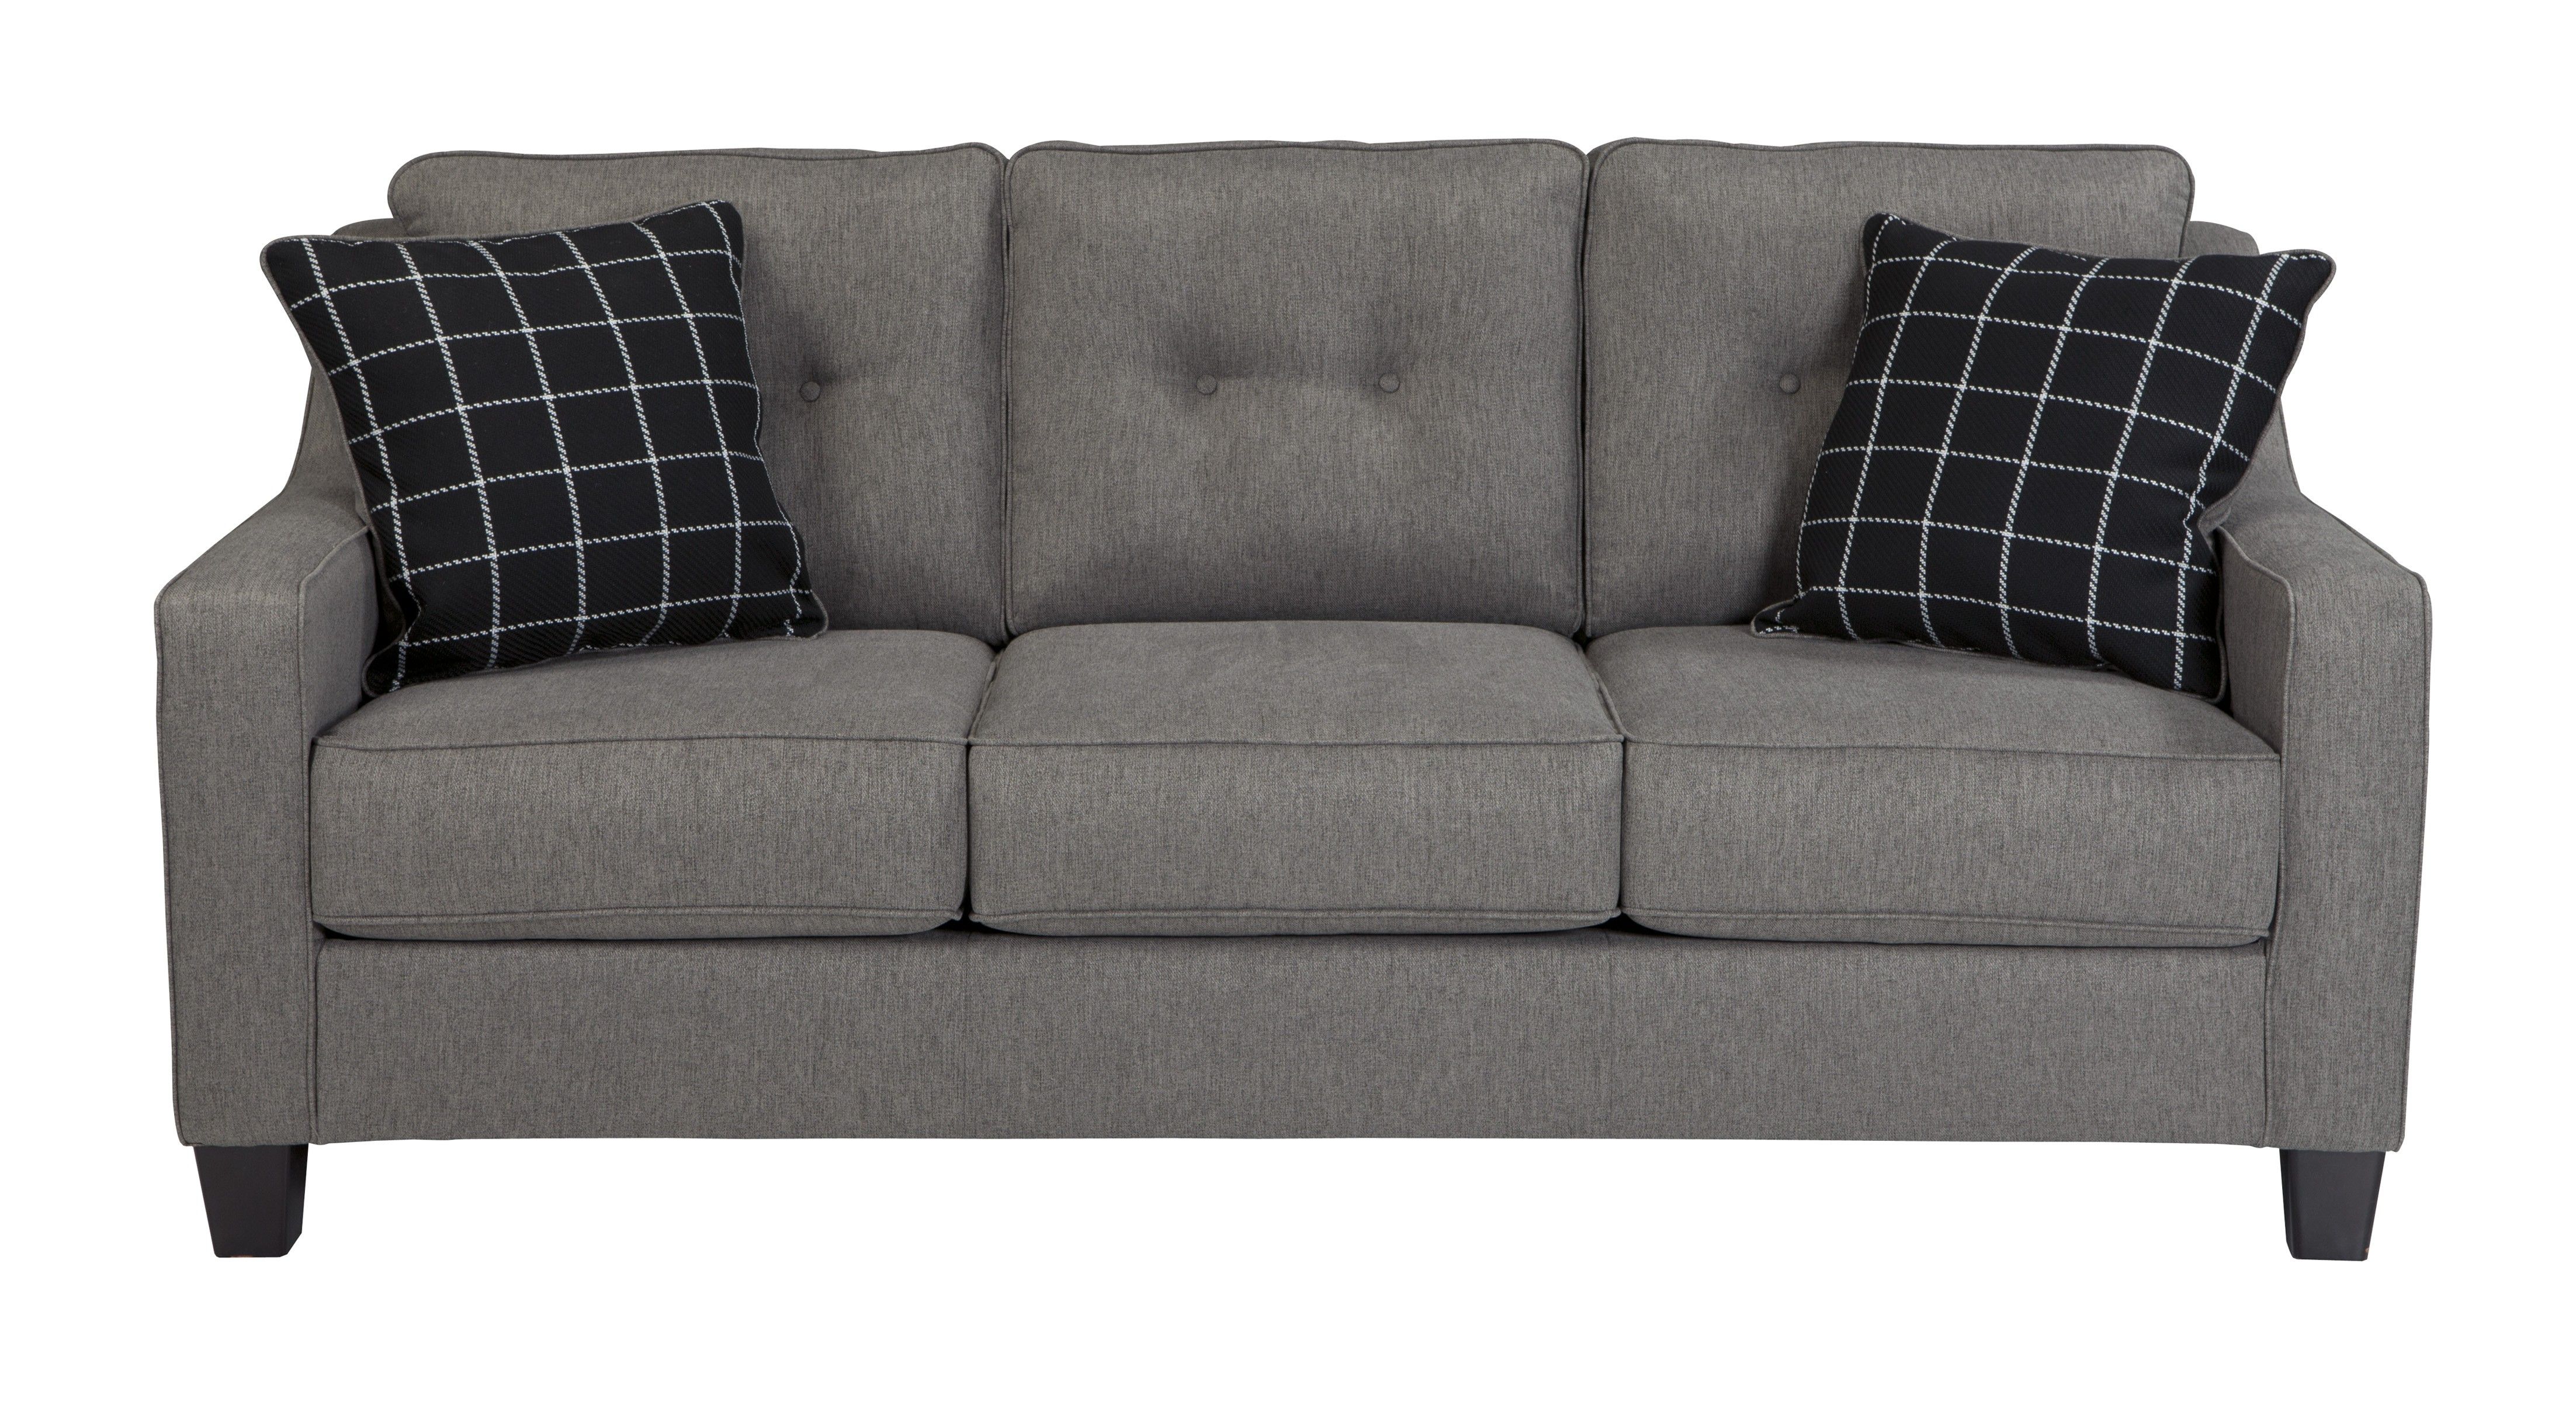 Ashley 5390138 Brindon Contemporary Sofa In Charcoal Fabric Upholstery In Ashley Tufted Sofa (View 10 of 12)